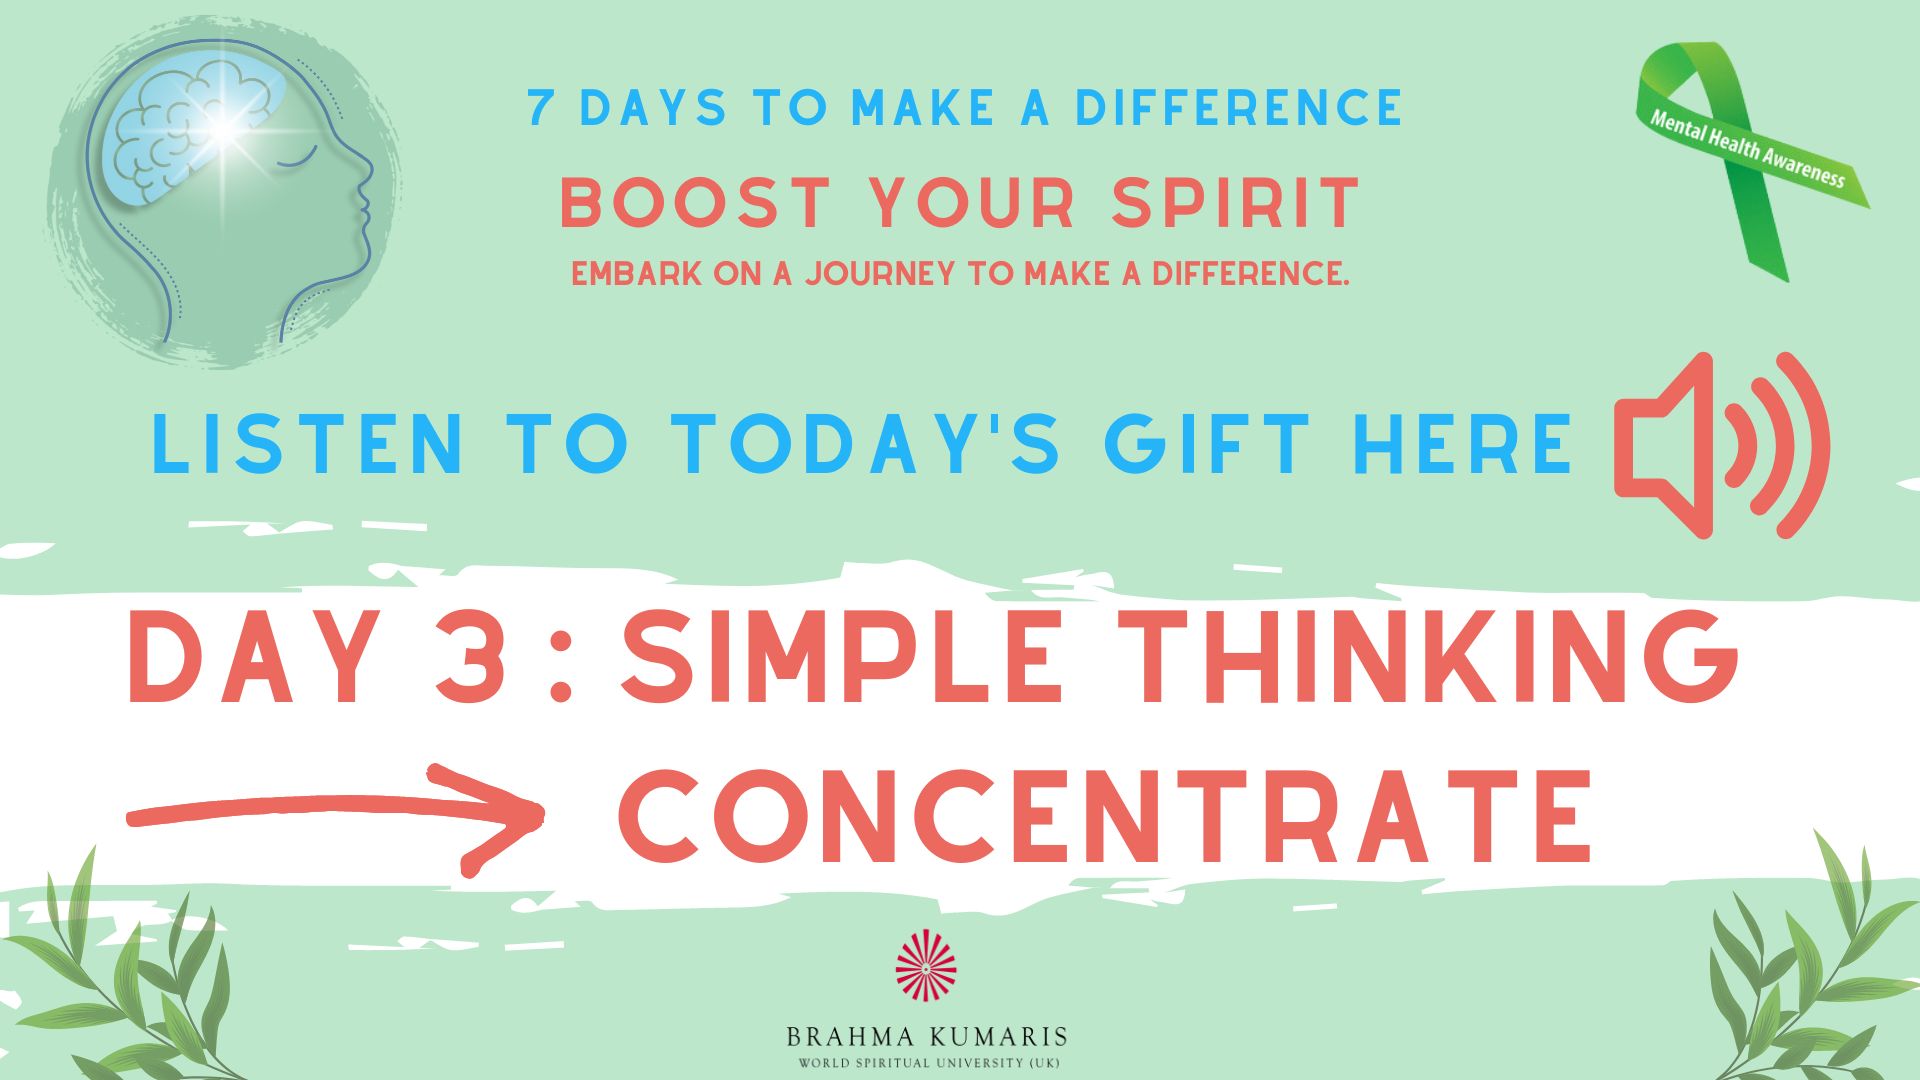 Day 3: Simple Thinking - Concentrate